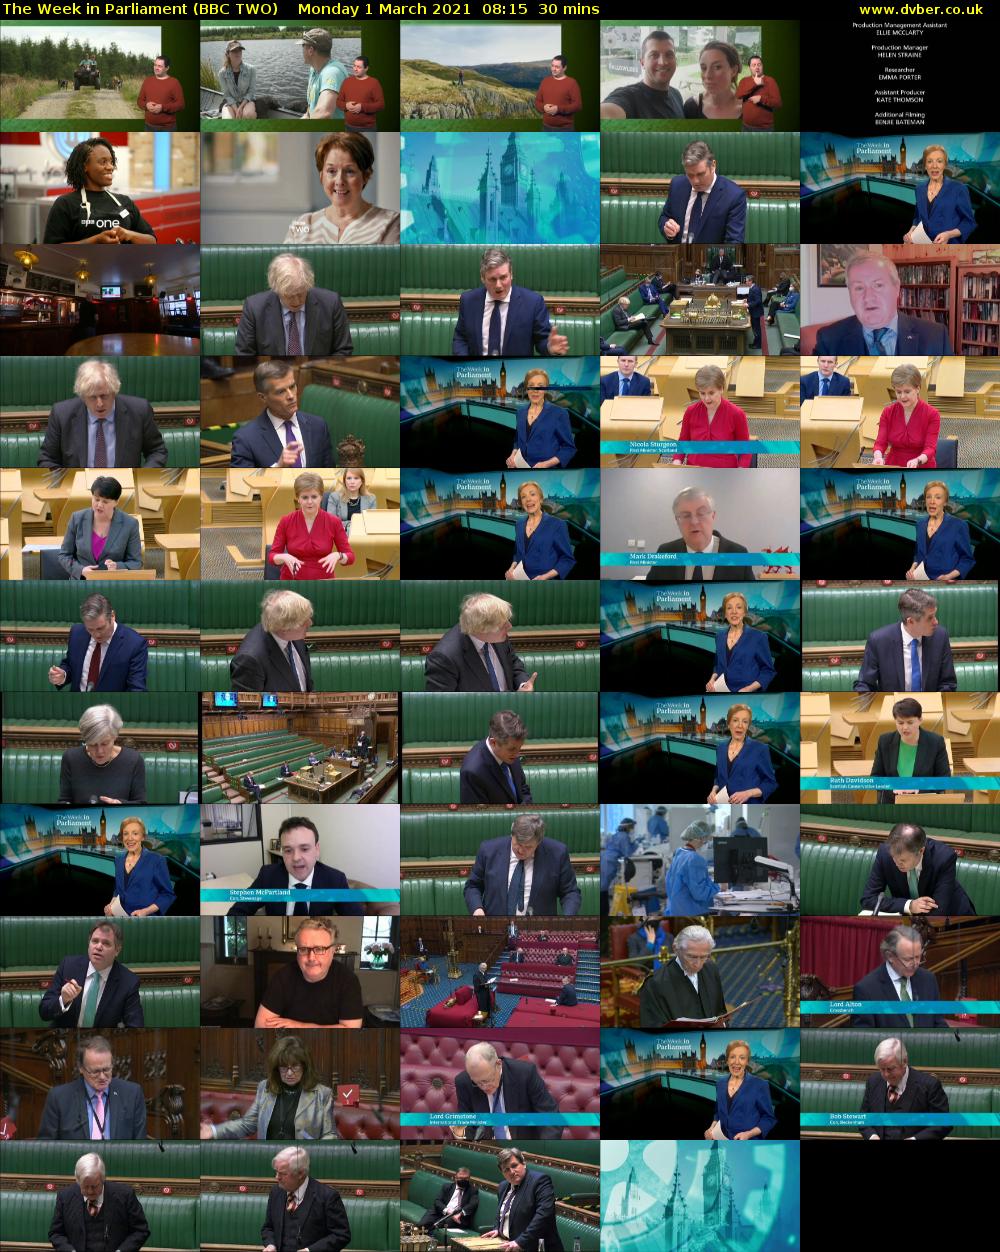 The Week in Parliament (BBC TWO) Monday 1 March 2021 08:15 - 08:45